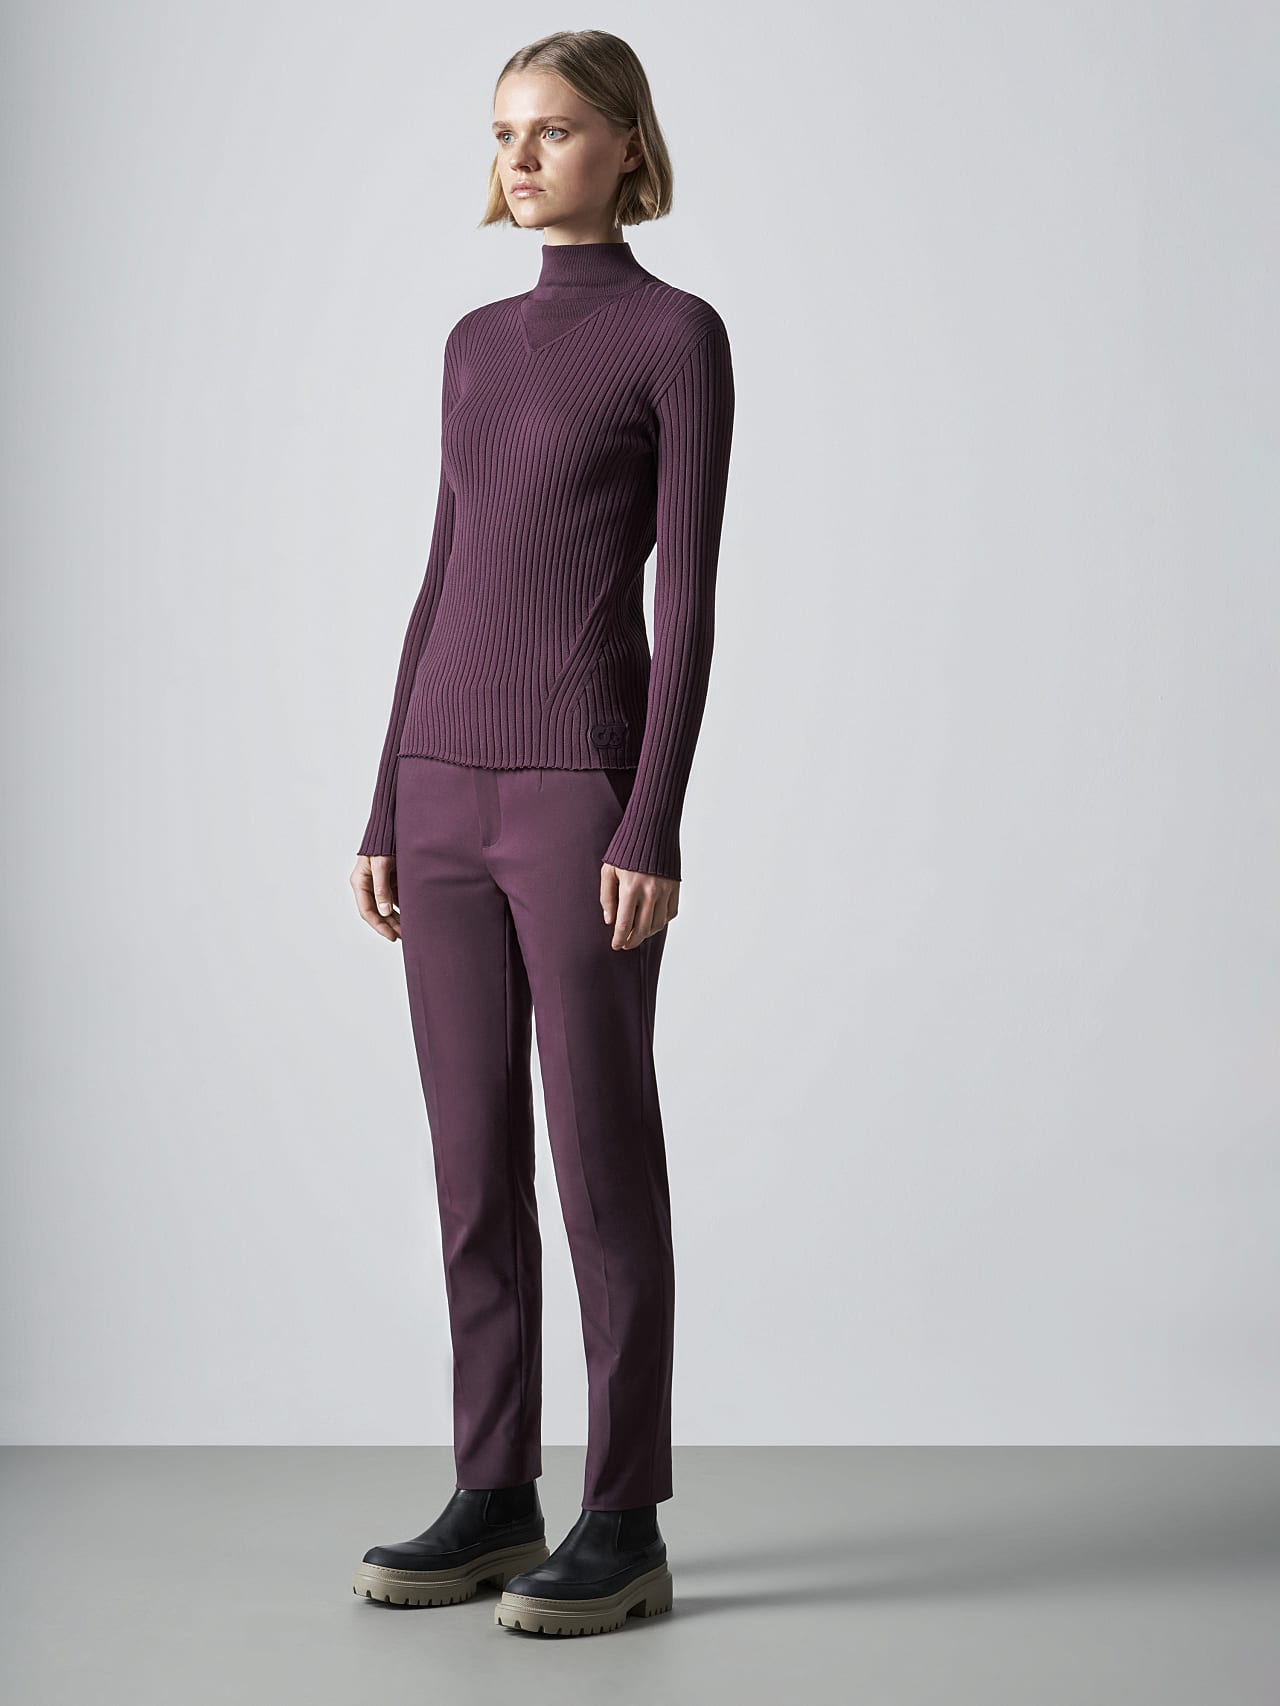 AlphaTauri | FAXEE V1.Y5.02 | Seamless 3D Knit Mock-Neck Jumper in Burgundy for Women